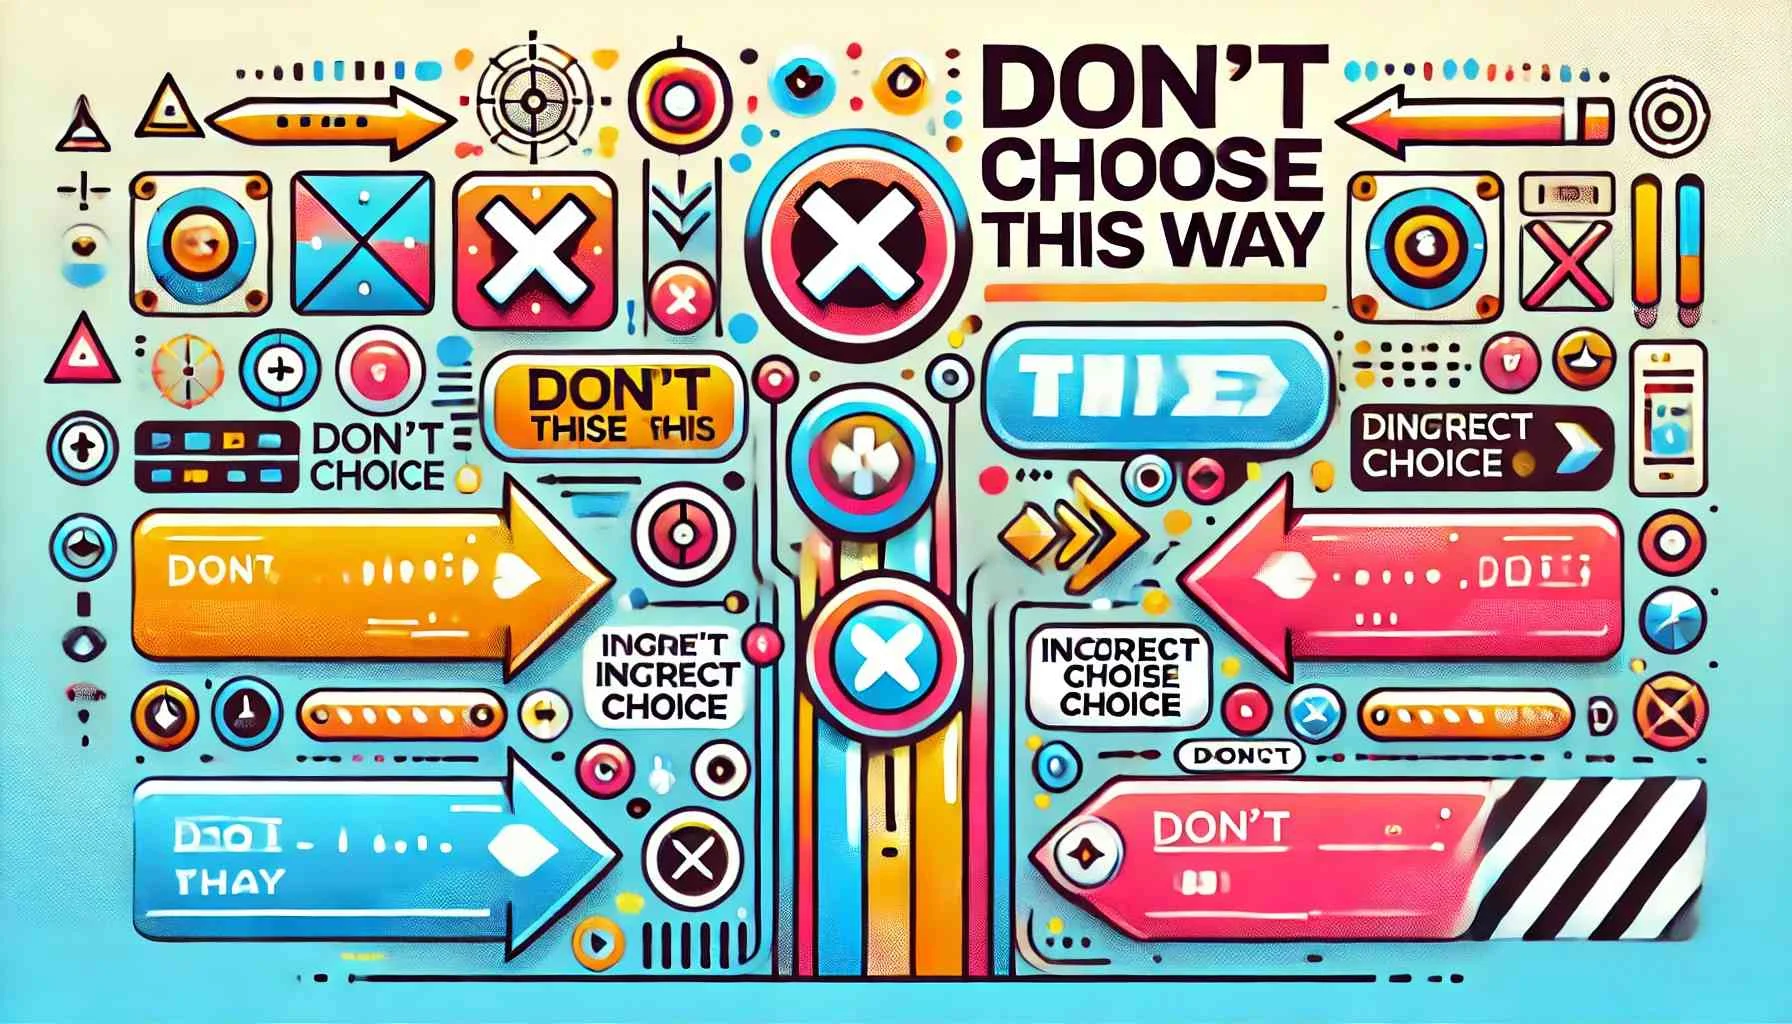 Themed Illustration Depicting The Concept Of Dont Choose This Way. The Image Should Use Vibrant And Modern Colors 20240714